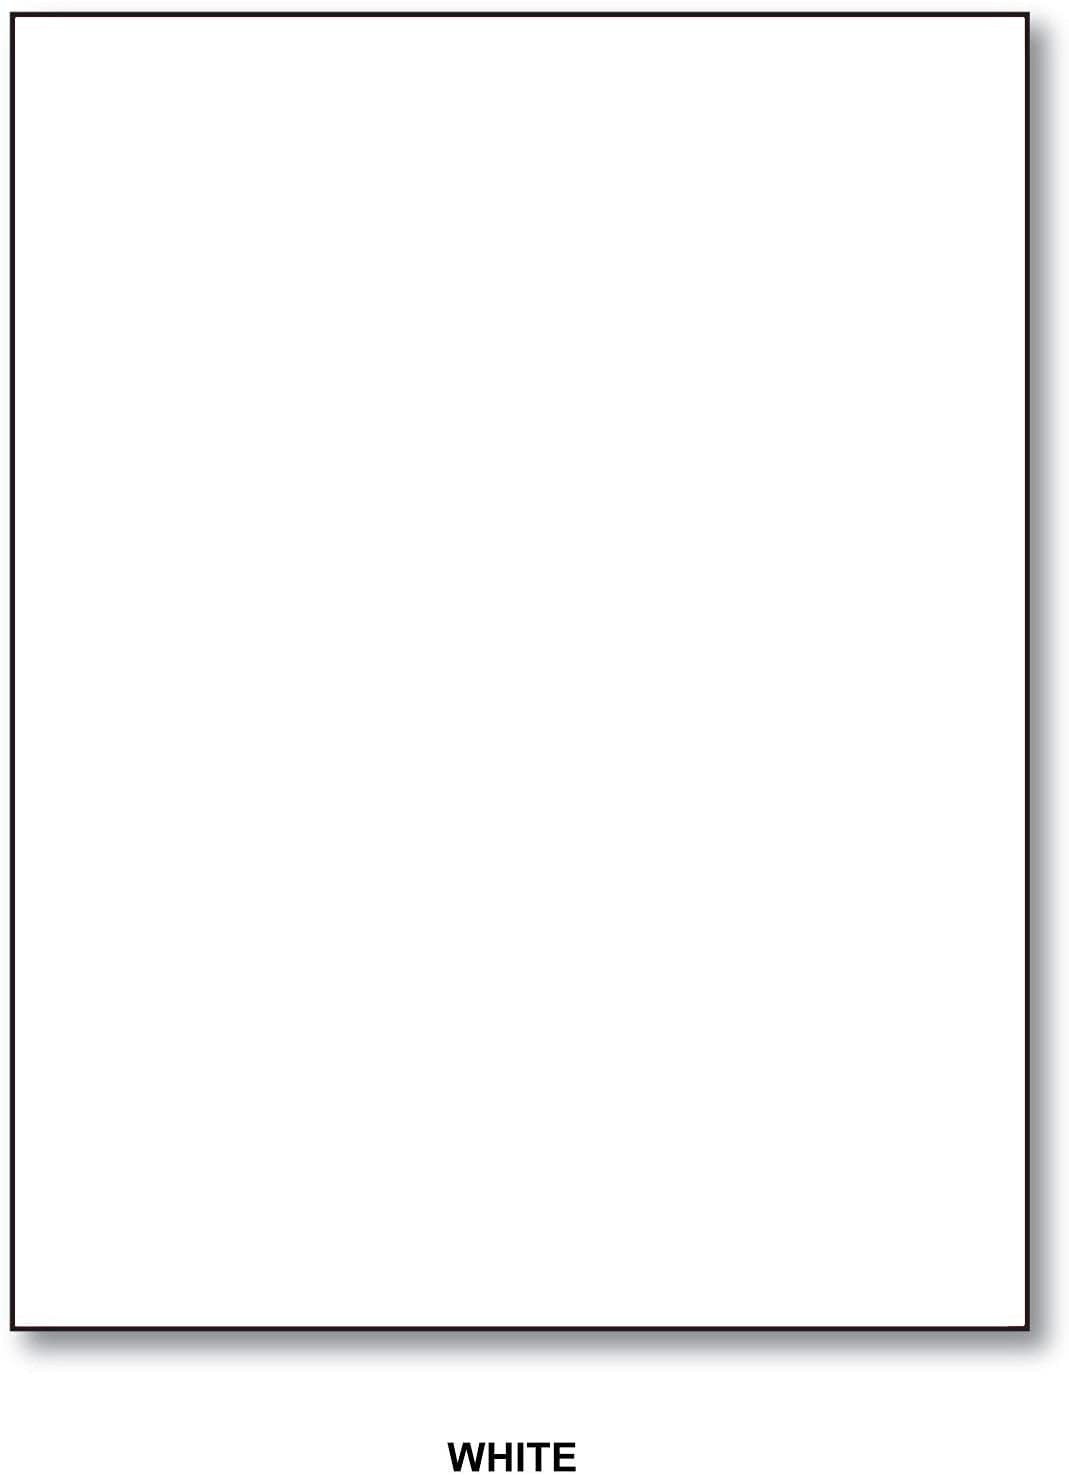 Bright White Paper 70lb. Text Pack of 100 Sheets (8.5x11inch)